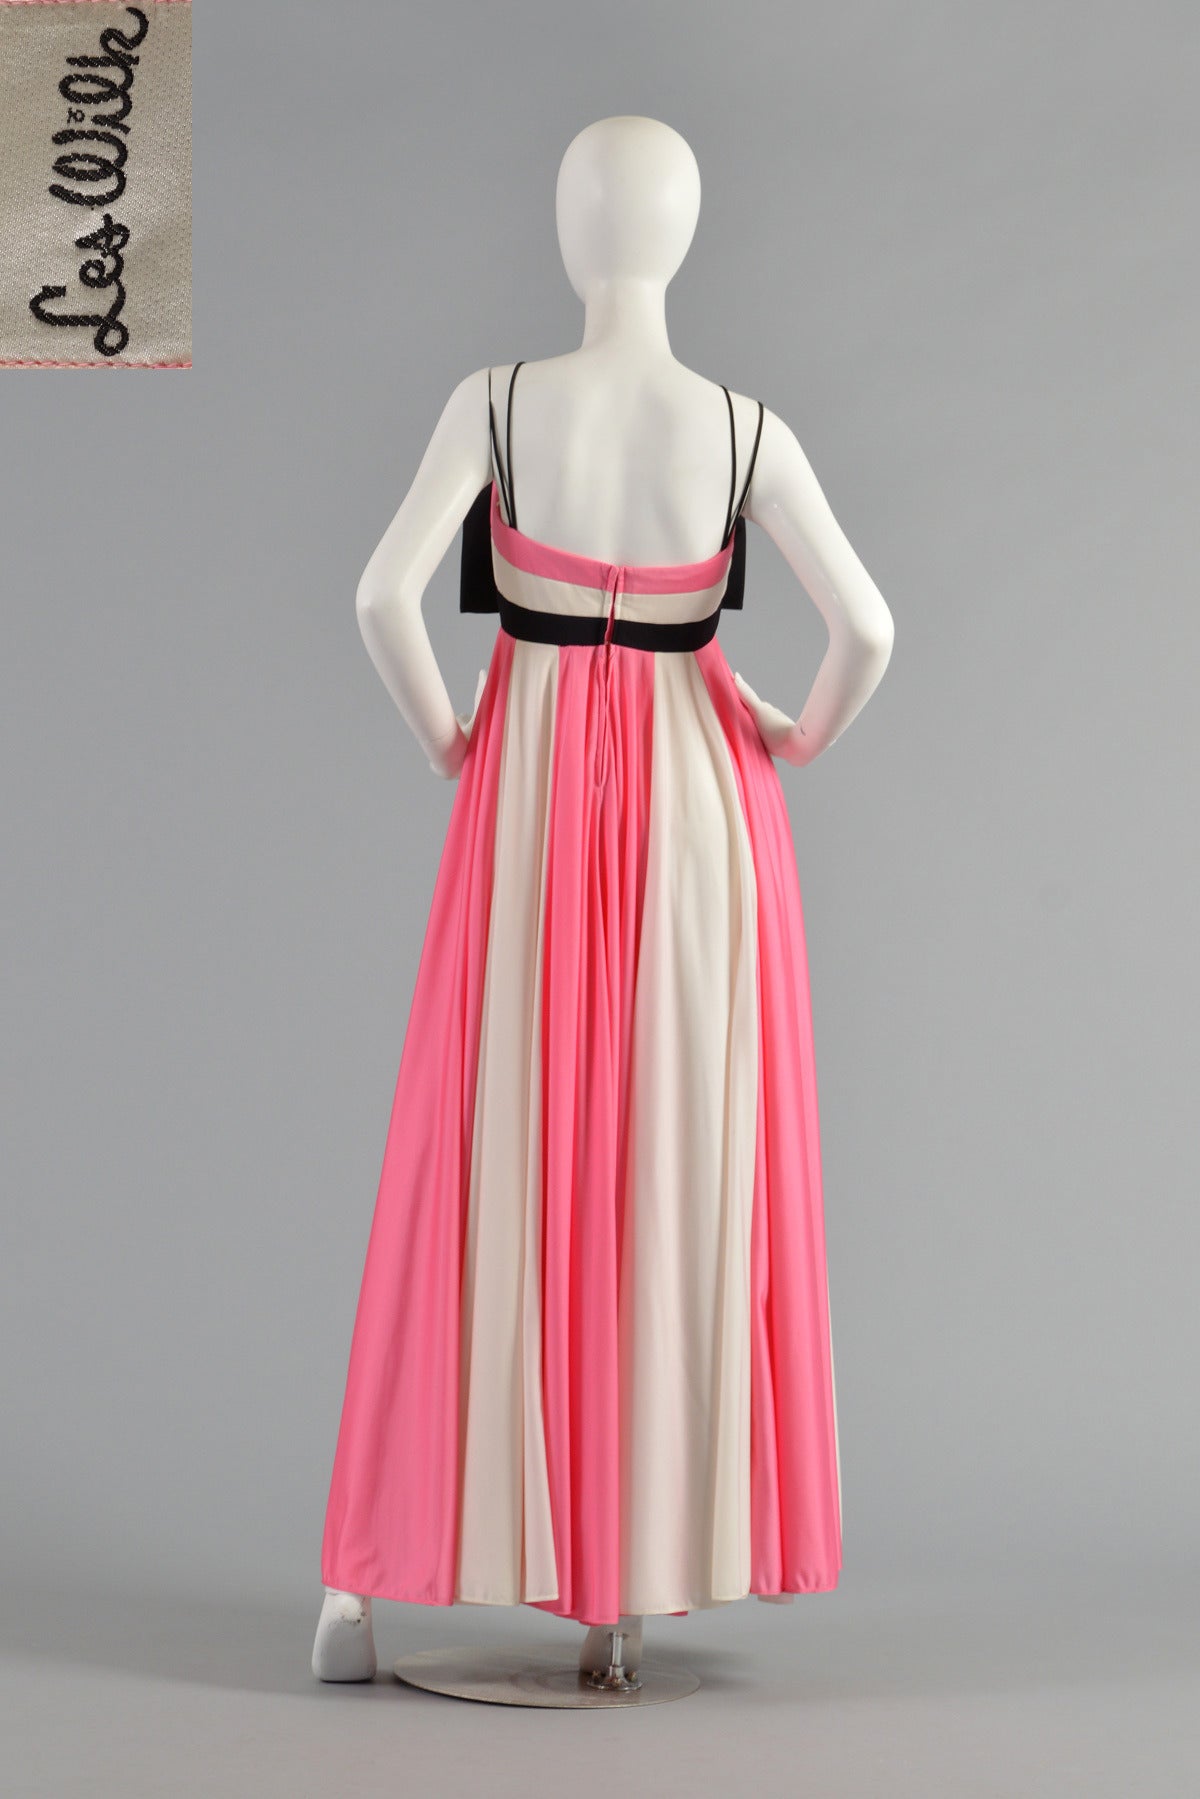 Les Wilk 1970's Colorblock Evening Gown with Massive Bow For Sale 5